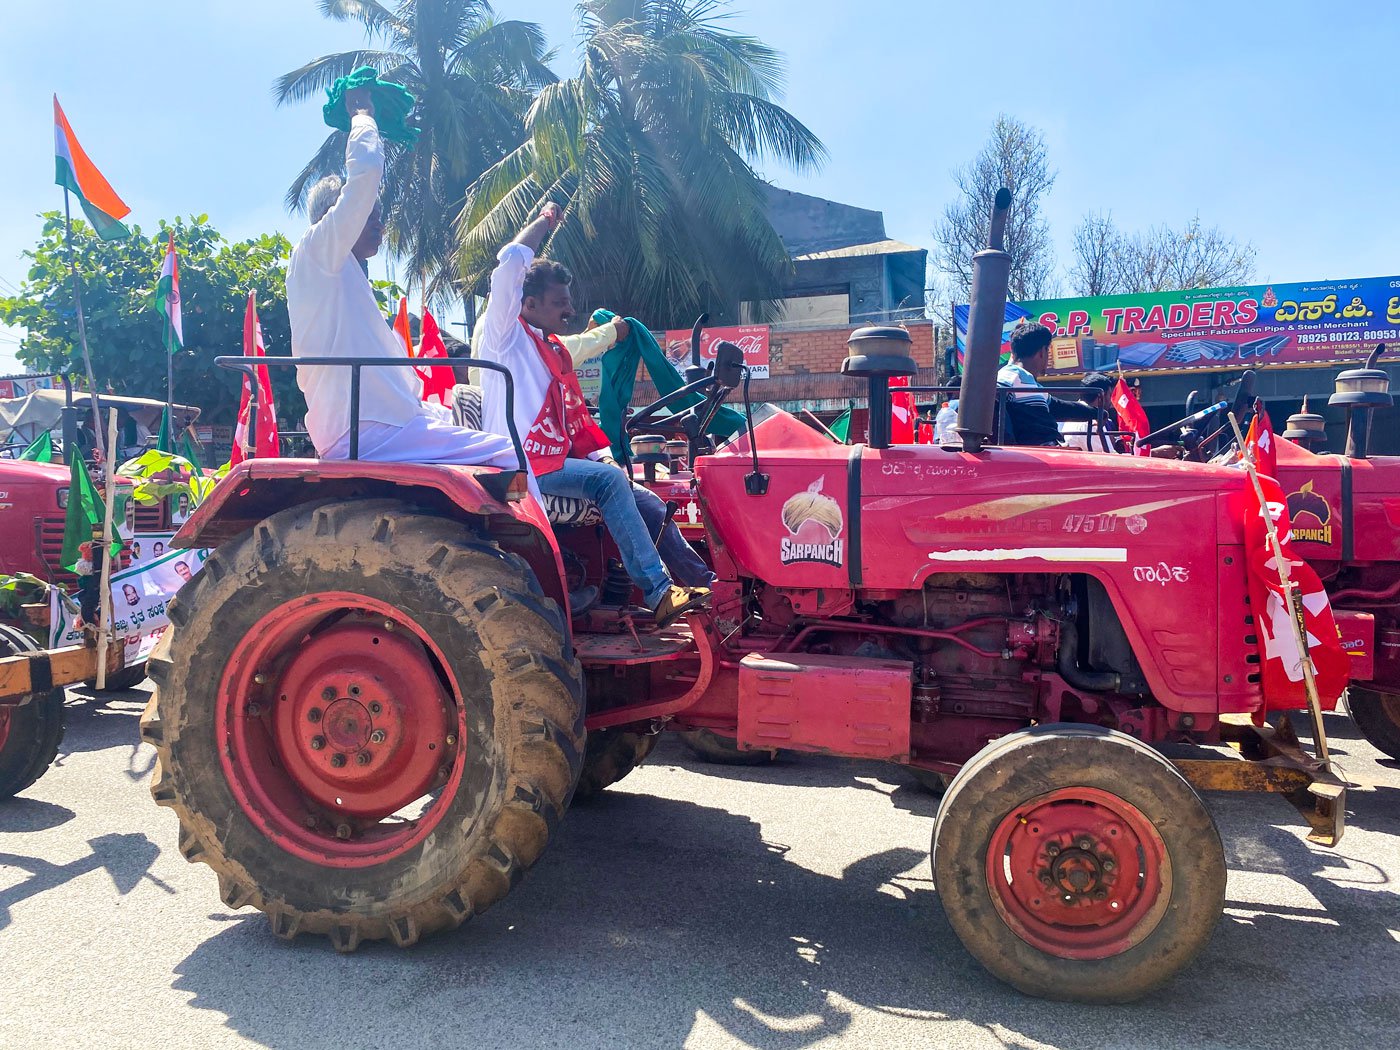 The new farms laws impact farmers all over India, say farmers from across Karnataka. Many of them joined the tractor parade in Bengaluru on Republic Day to support the farmers protesting in Delhi against the laws